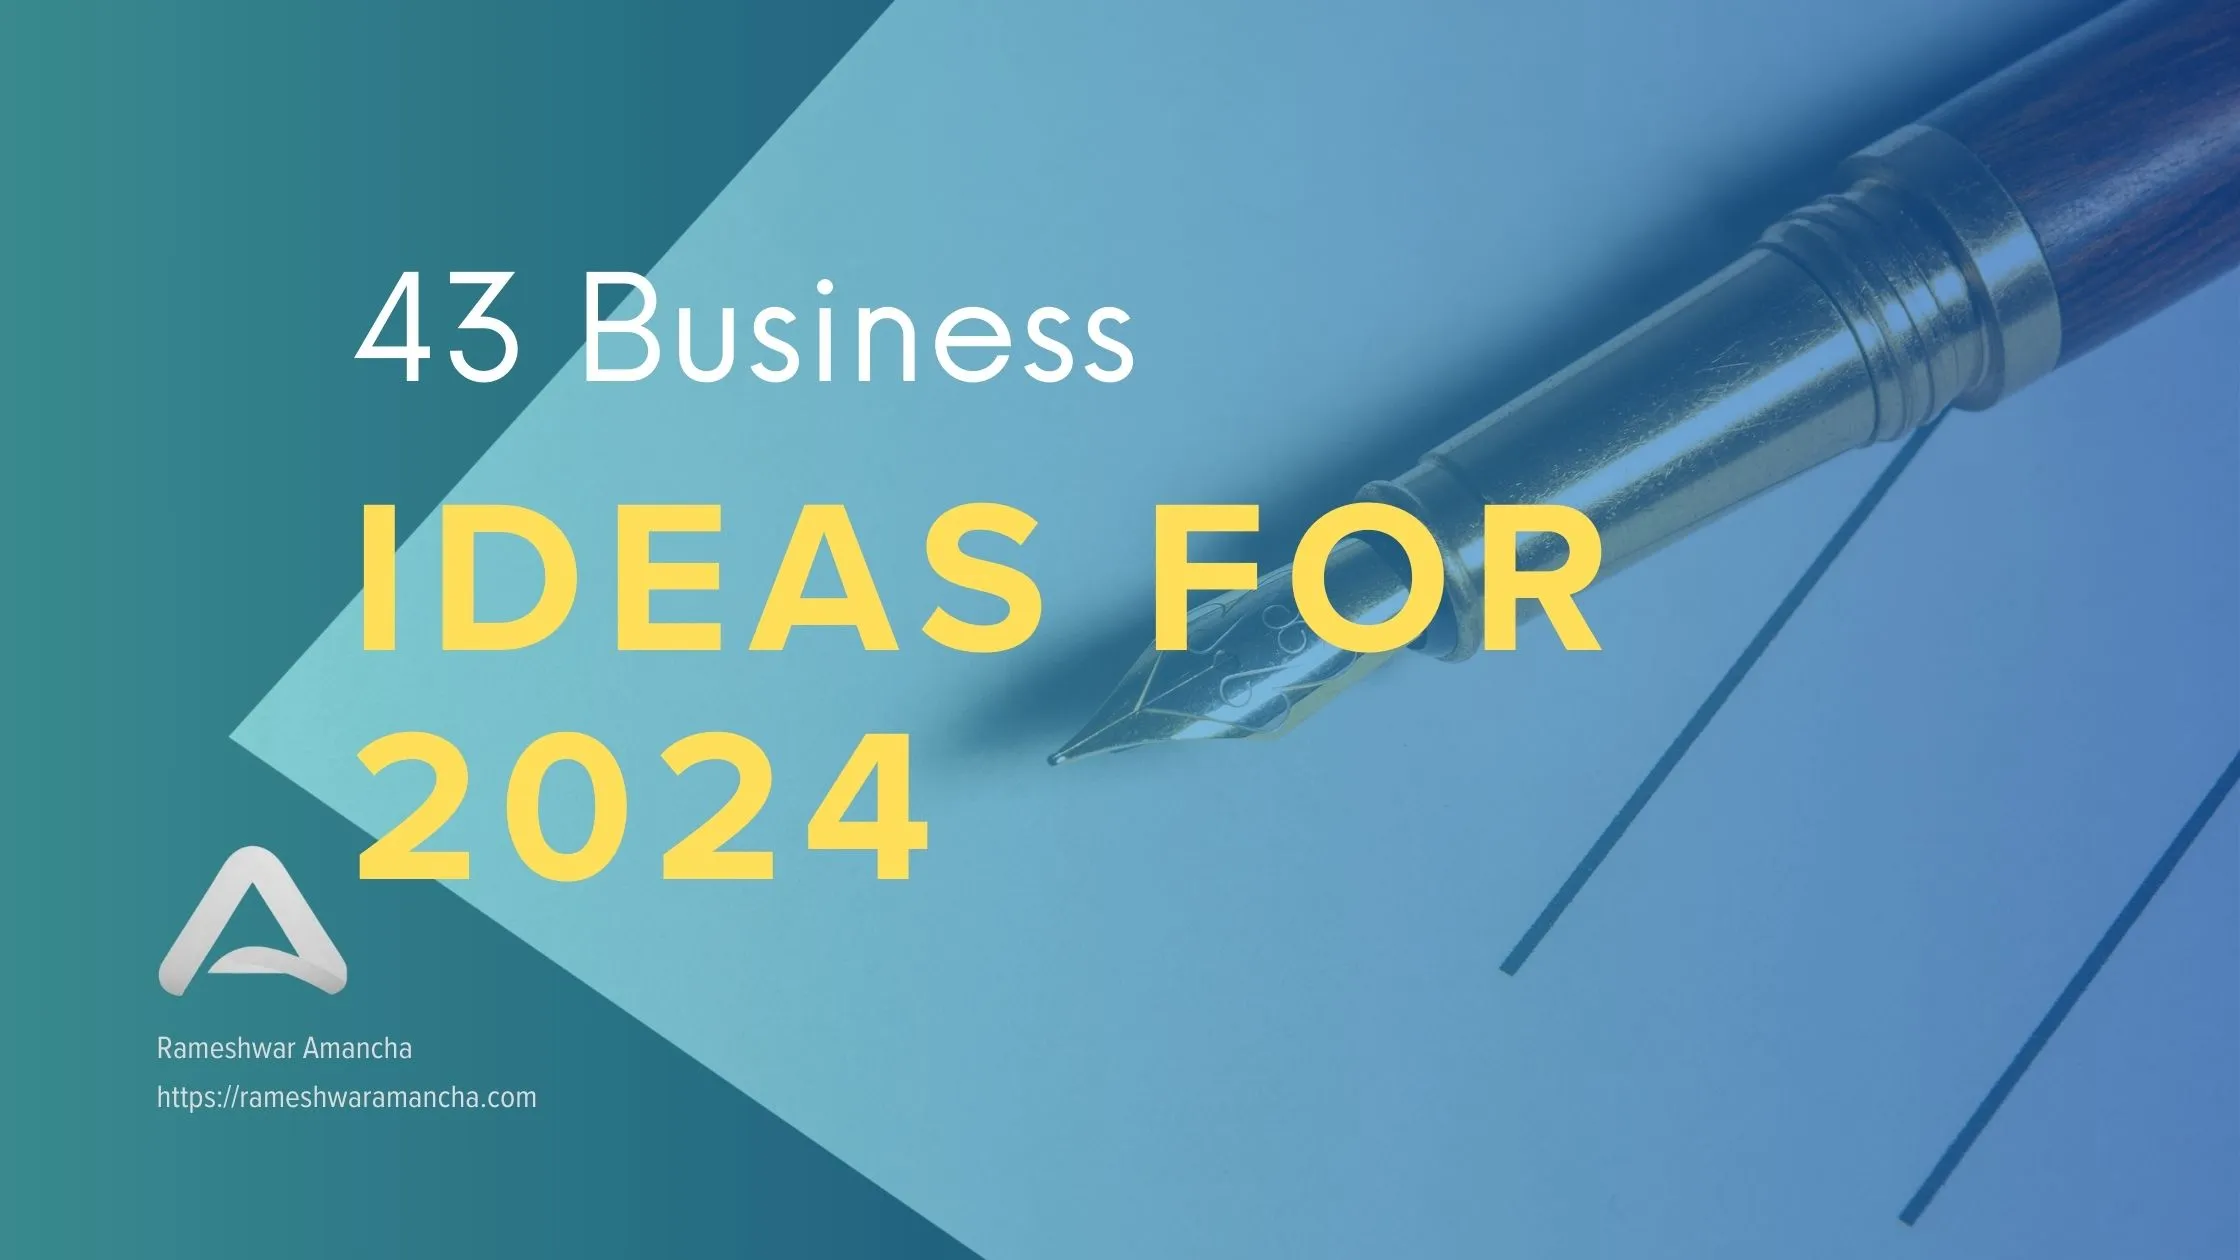 43 Business Ideas for 2024